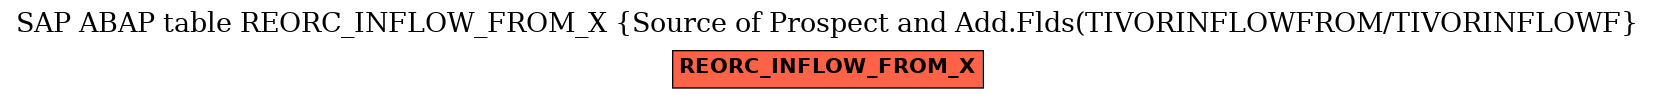 E-R Diagram for table REORC_INFLOW_FROM_X (Source of Prospect and Add.Flds(TIVORINFLOWFROM/TIVORINFLOWF)